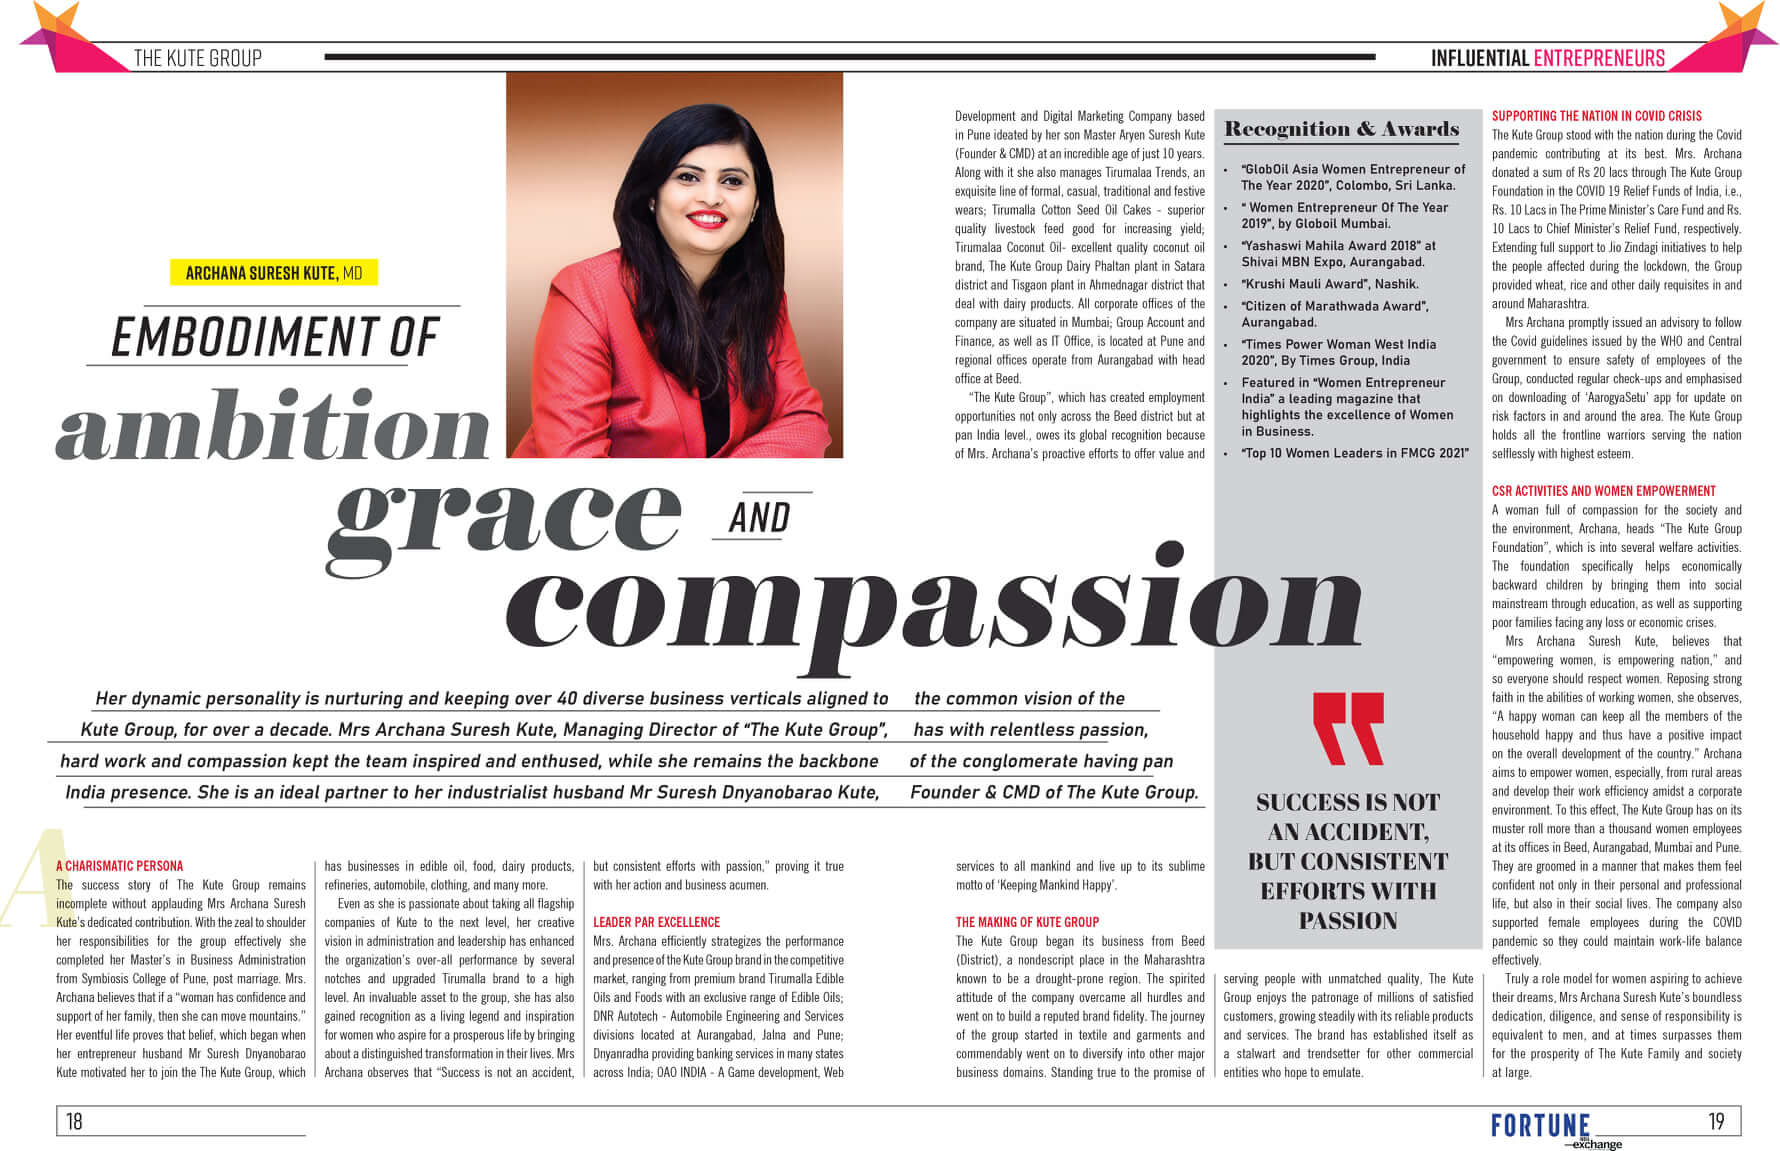 Mrs. Archana Suresh Kute (MD-The Kute Group) featured in “Fortune India Exchange” Business Magazine